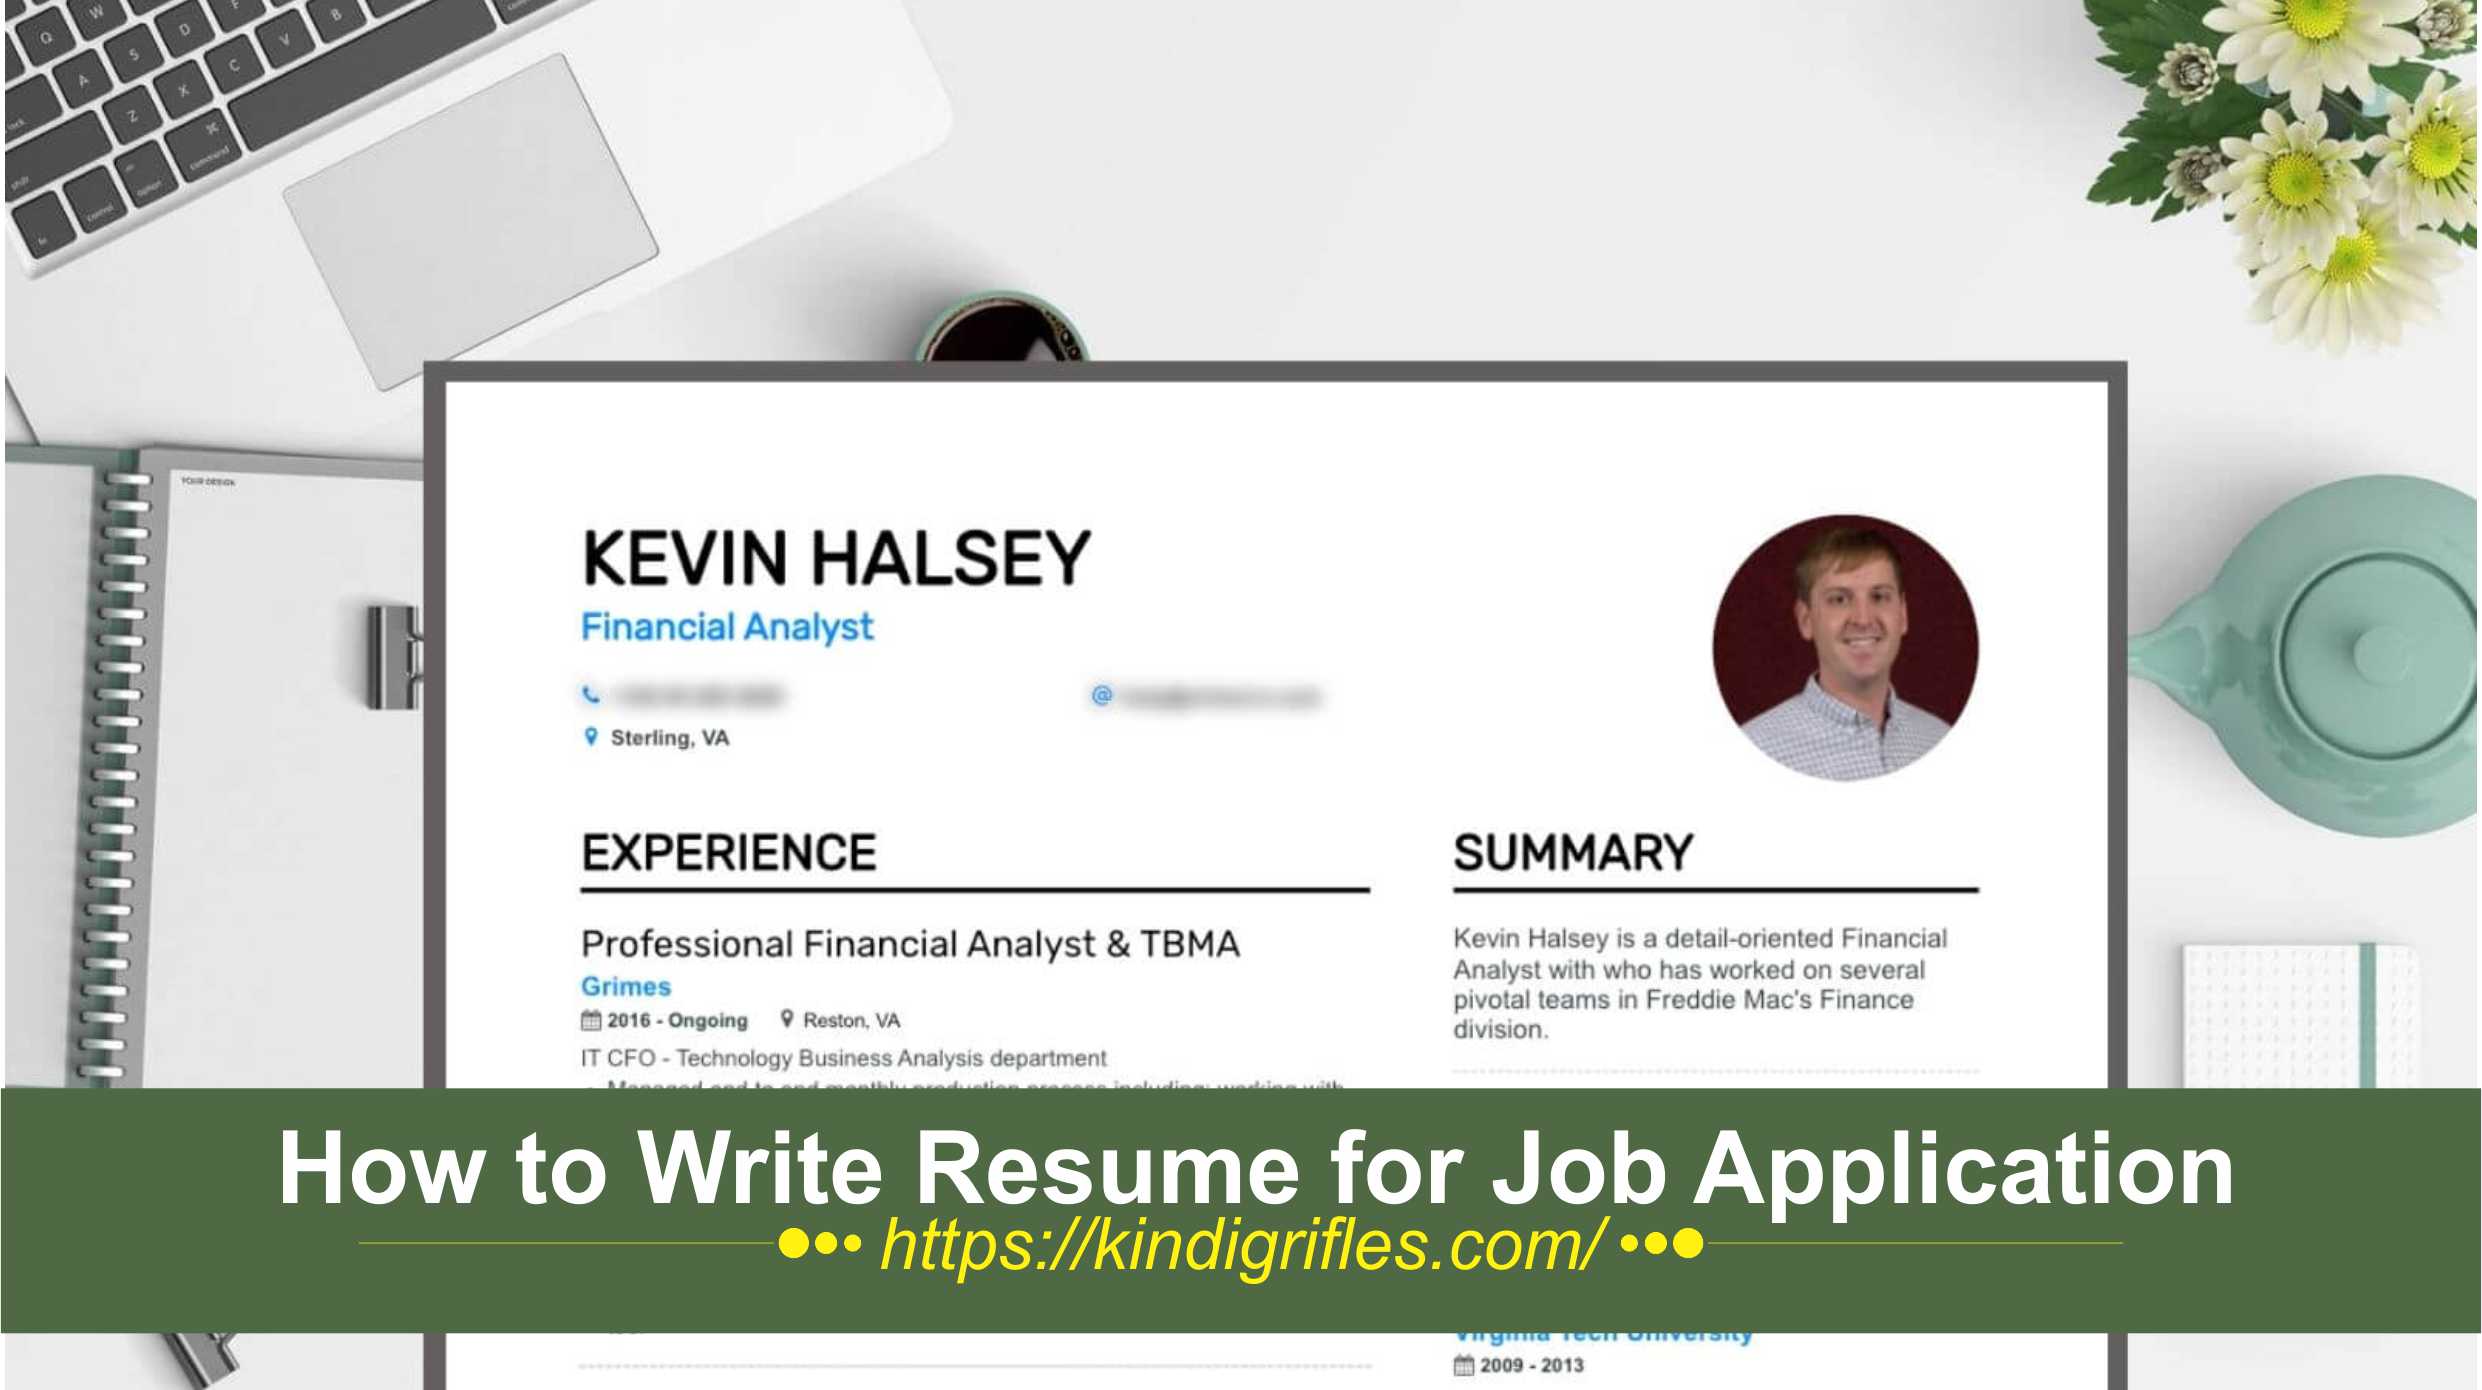 How to Write Resume for Job Application